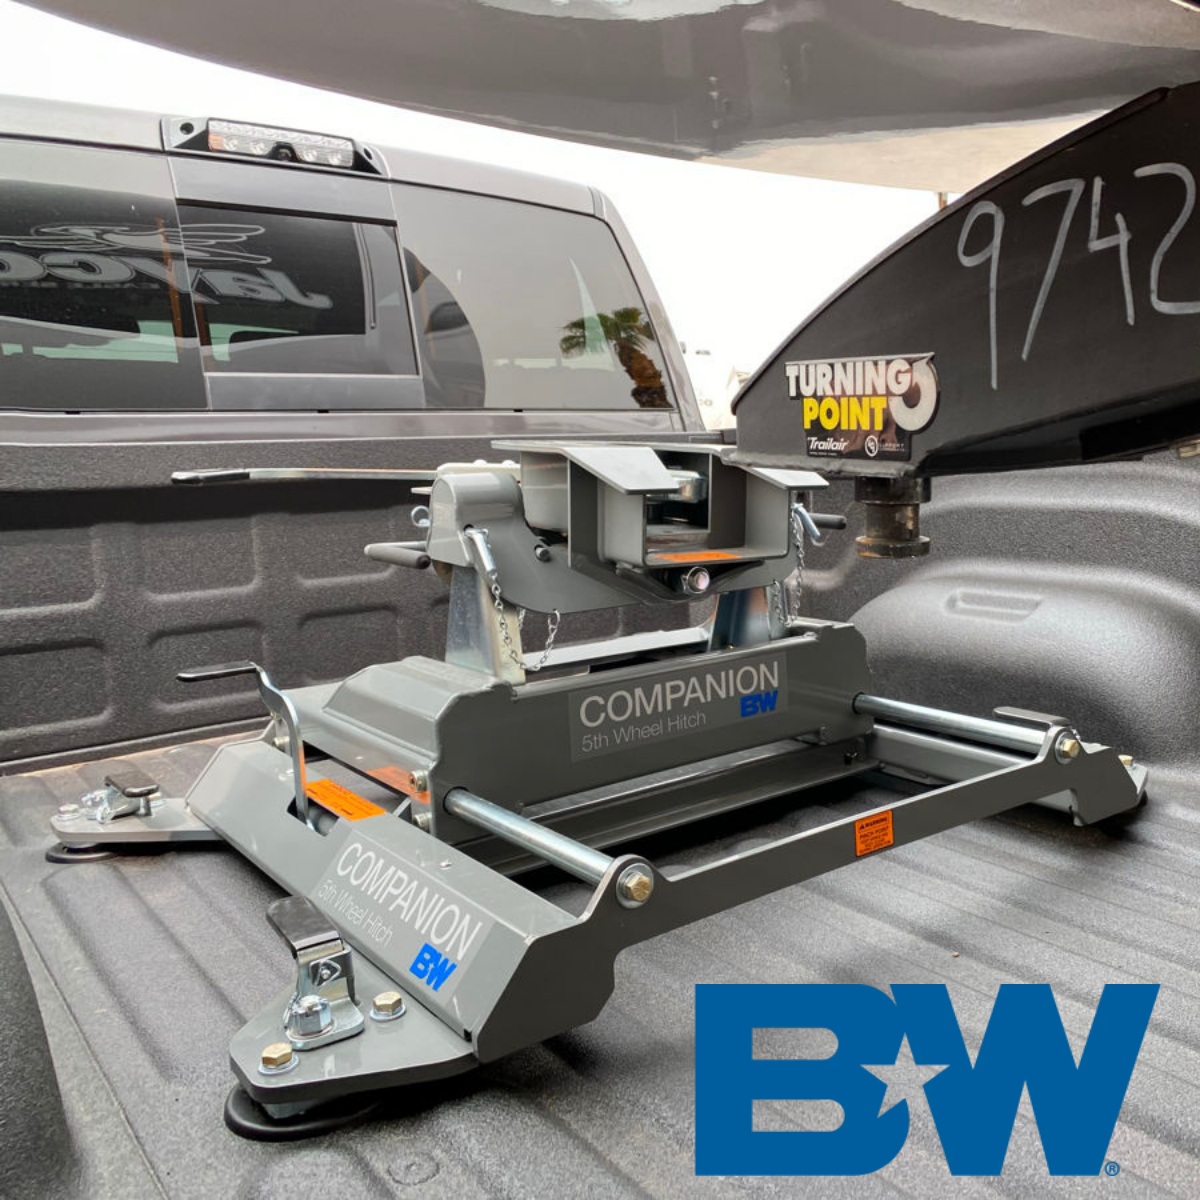 Gain more turning clearance when towing with the Companion Slider from B&W Hitches.